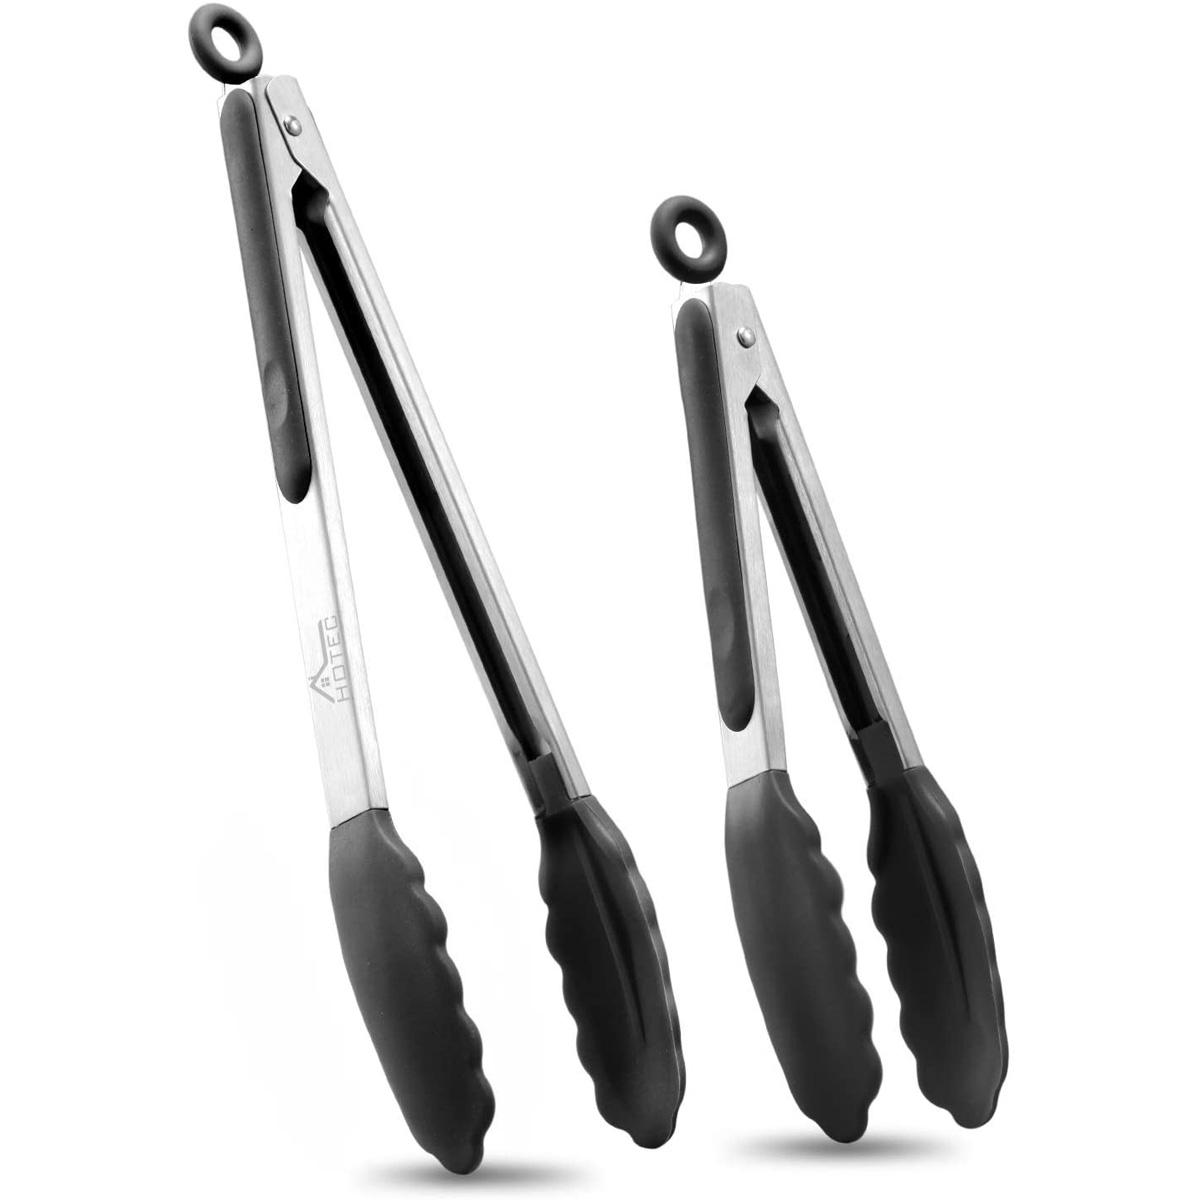 2-Piece Hotec Stainless Steel Locking Kitchen Tongs for $7.64